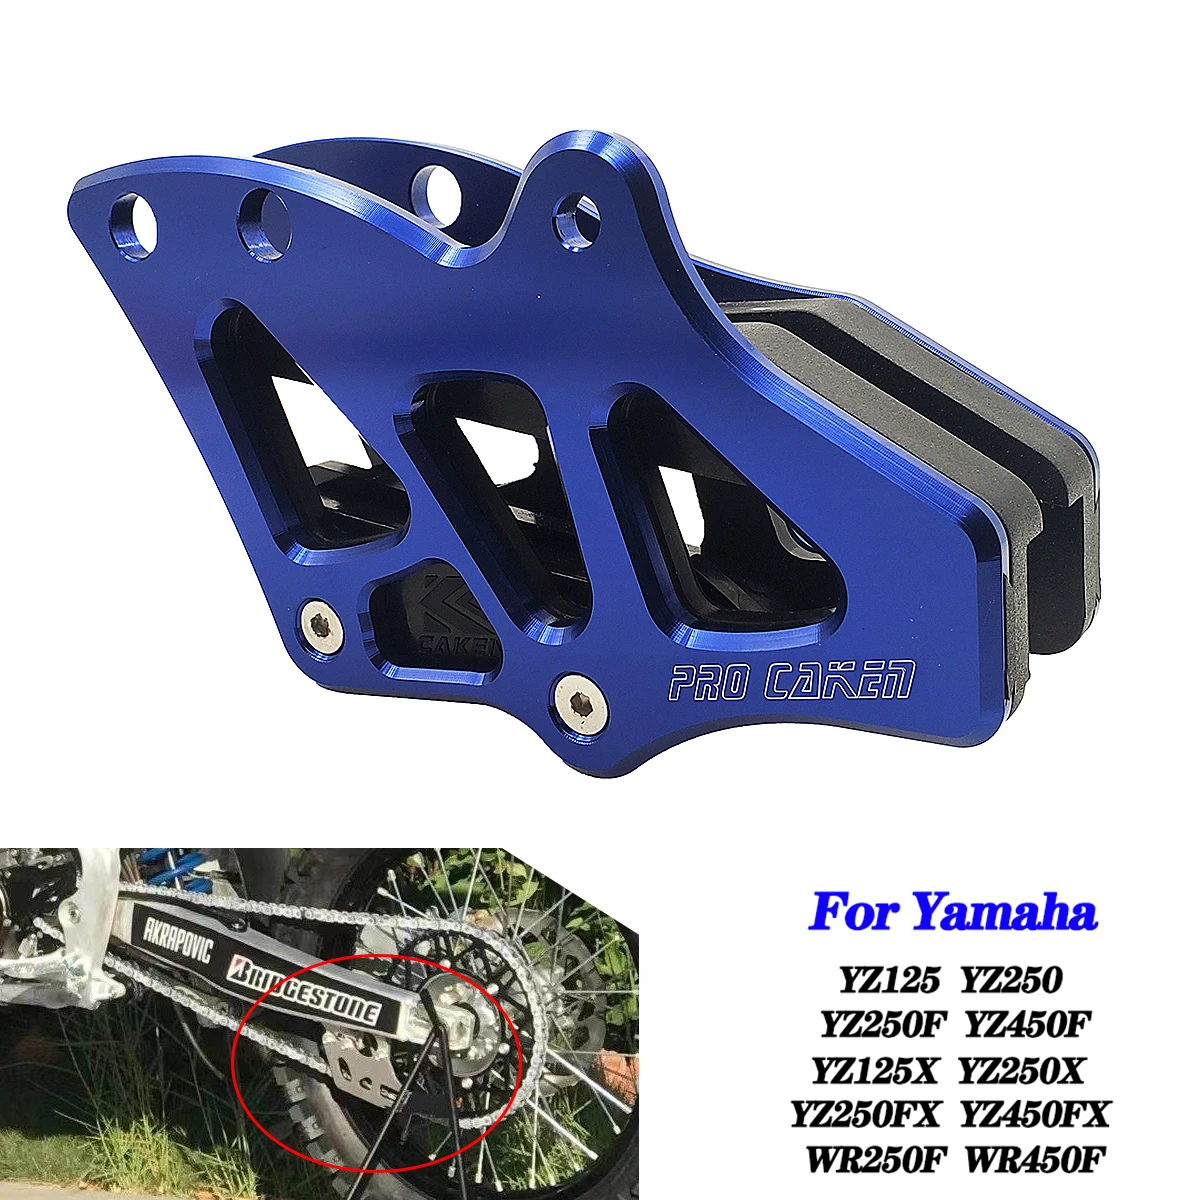 

CNC Rear Sprocket Chain Guide Guard For Yamaha YZ250F YZ450F YZ125 YZ250 YZ250X YZ250FX YZ450FX WR 250F 450F WR250F WR450F YZ F